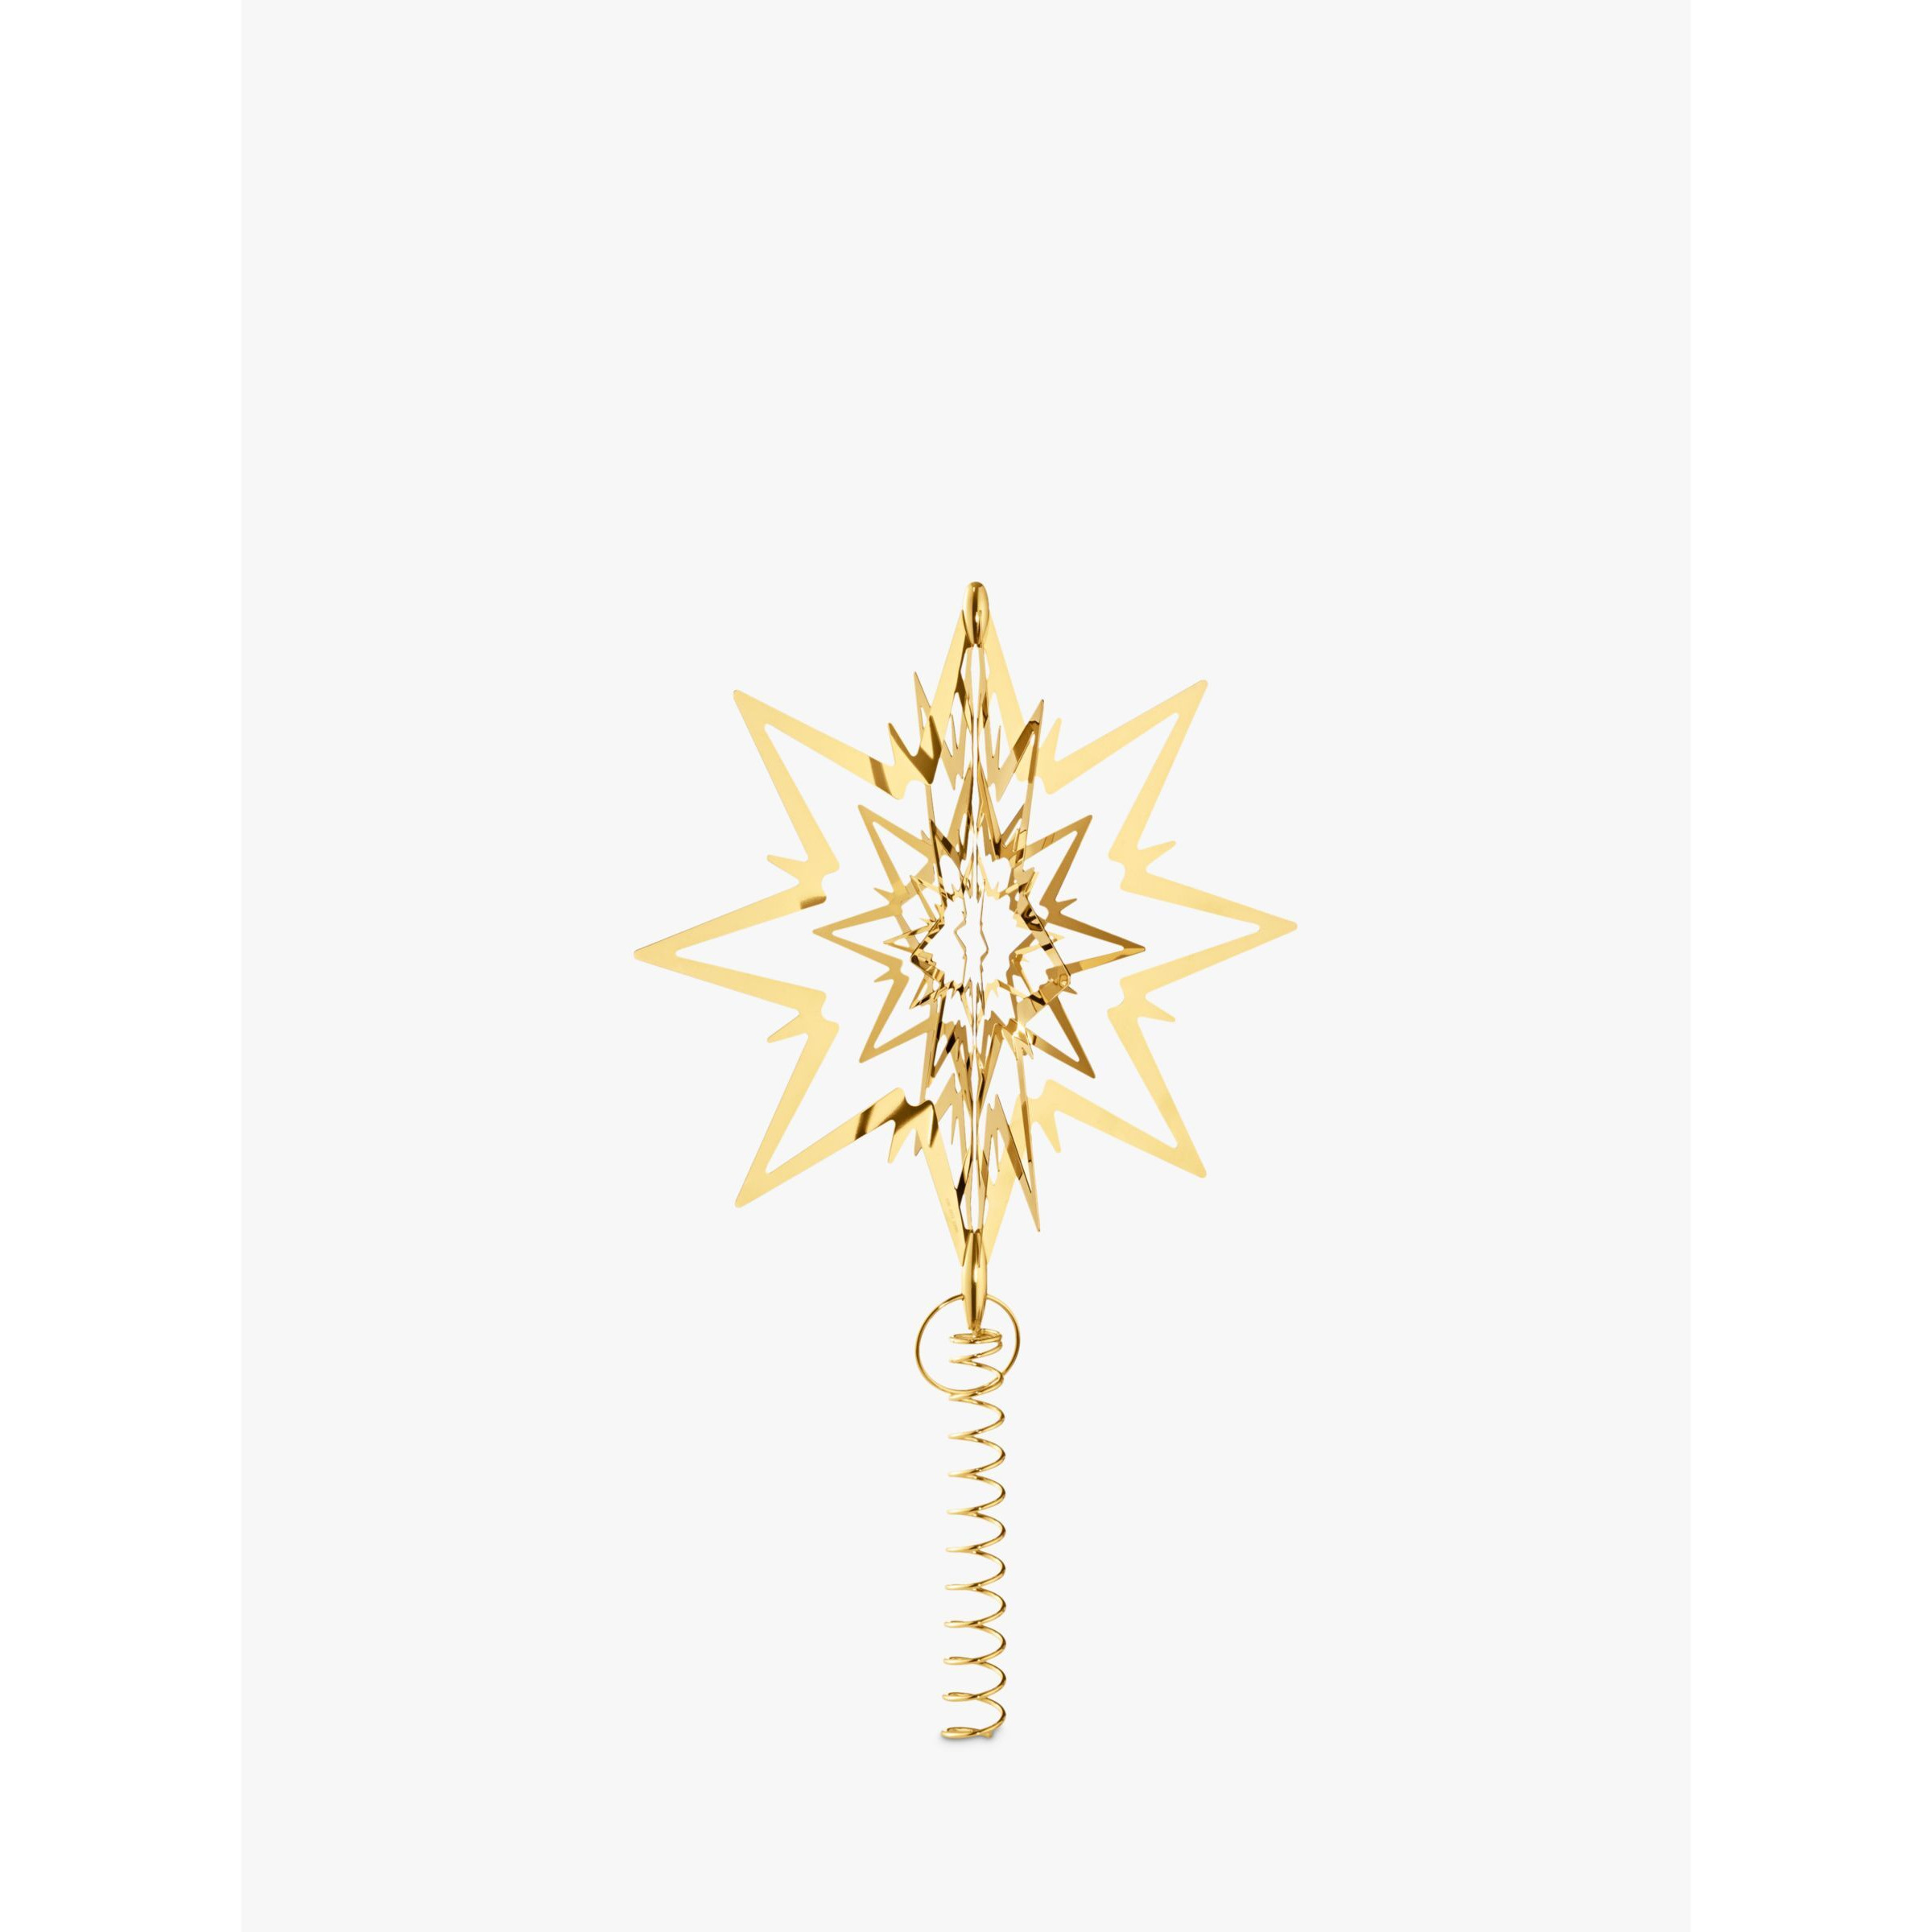 Georg Jensen Gold-Plated Star Christmas Tree Top Decoration, Large - image 1